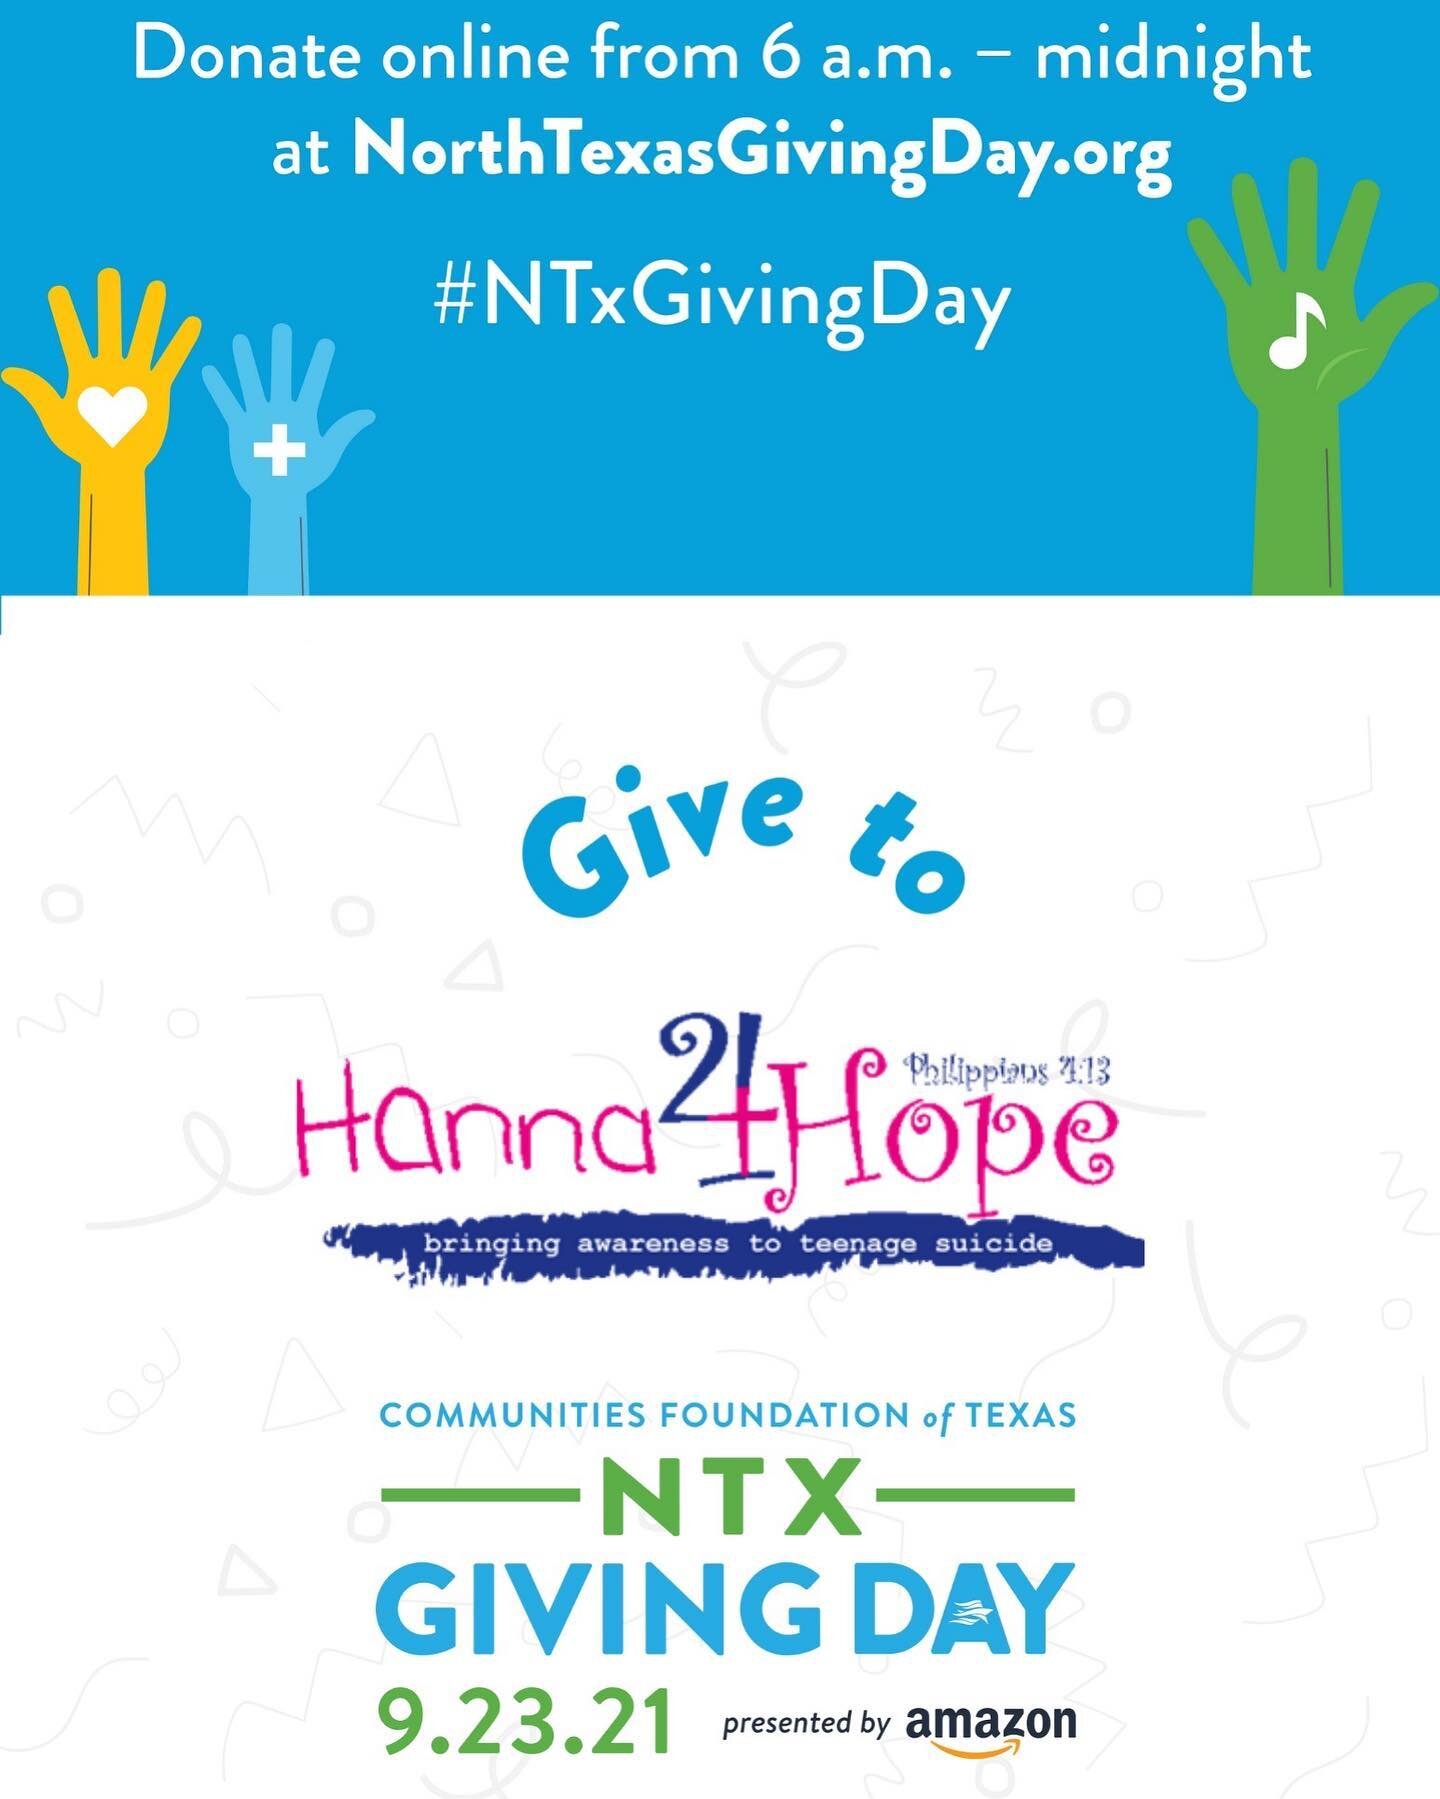 It's almost North Texas Giving Day!

Your gift matters.
Everyone can be a philanthropist on NTX Giving Day! No matter the size of the gift, your role as a giver increases the capacity of nonprofits like ours to do the work. #NTxGivingDay

DONATE HERE